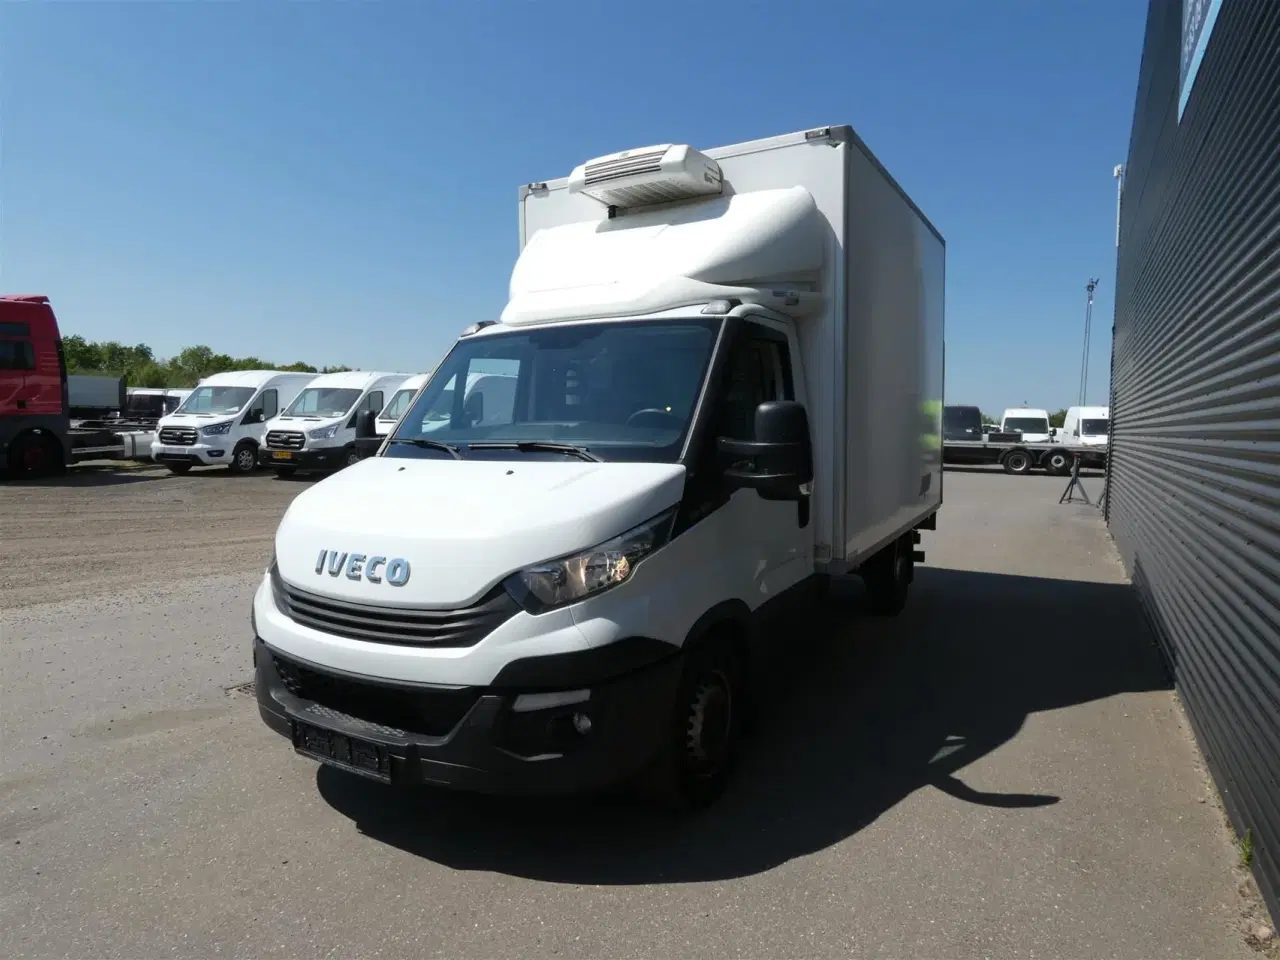 Billede 4 - Iveco Daily 35S18 3750mm 3,0 D 180HK Ladv./Chas. 6g